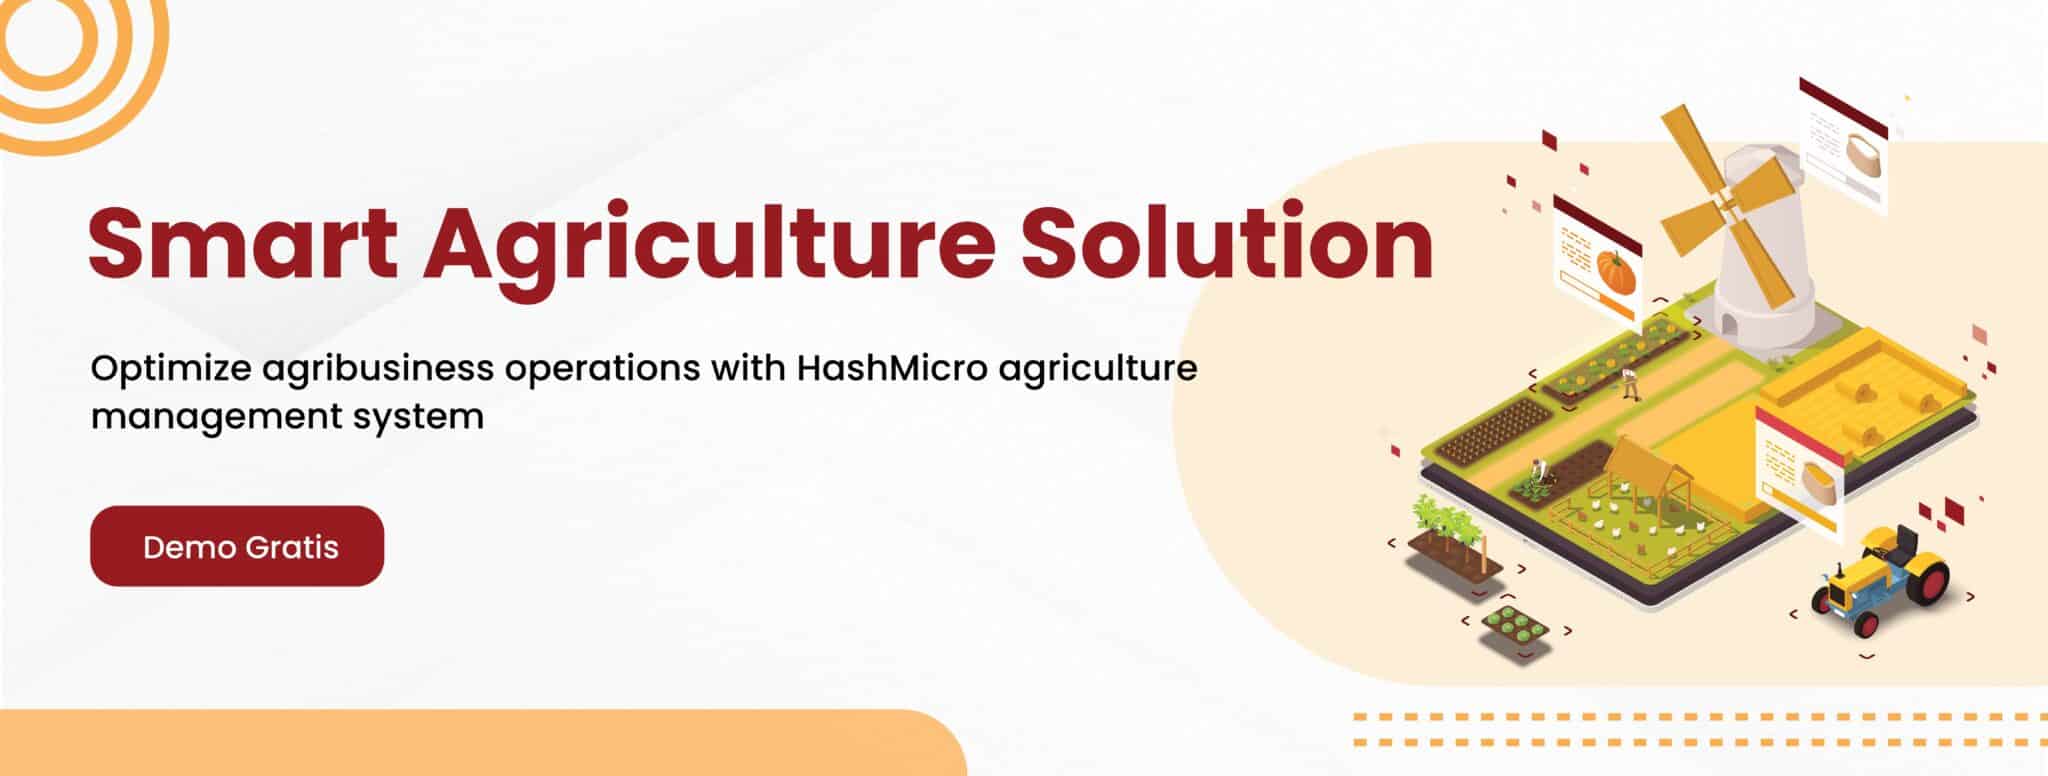 smart agriculture solution